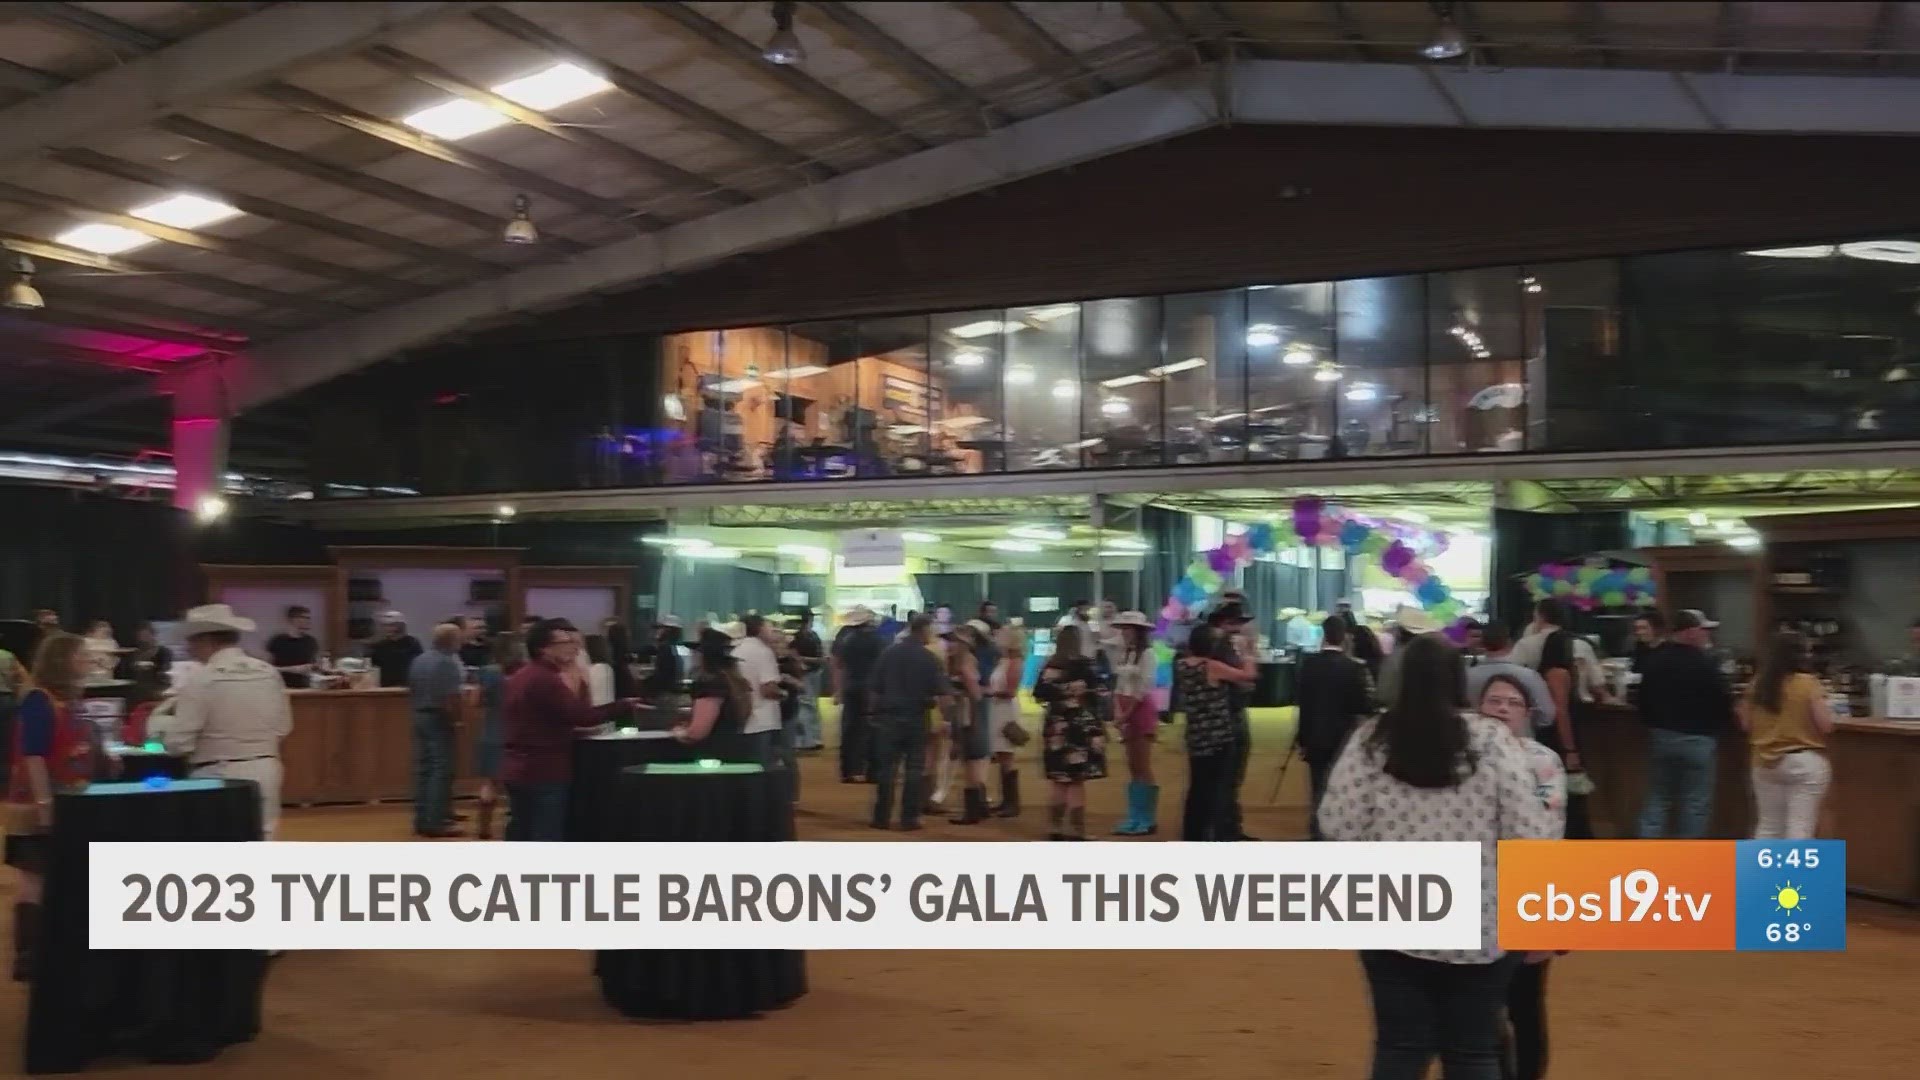 Annual Tyler Cattle Barons' Gala gearing up for night of music, fun